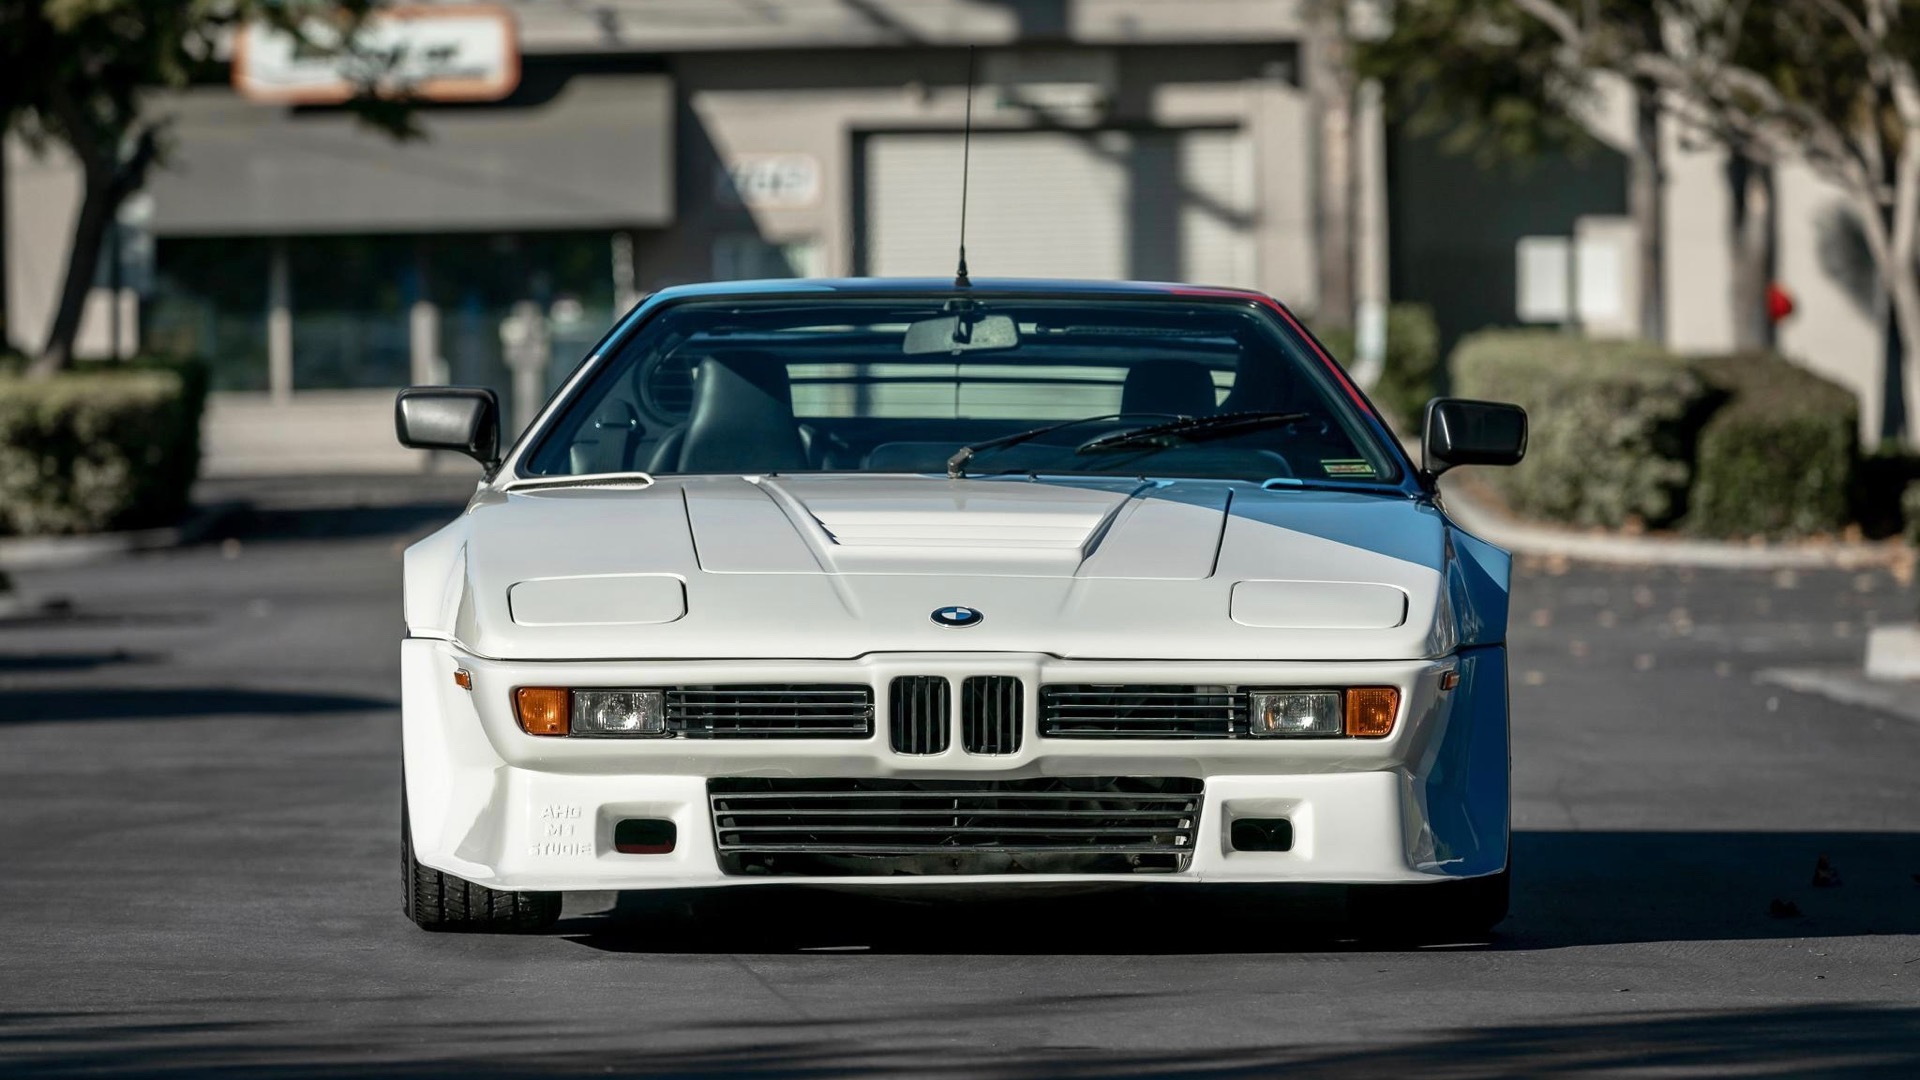 1980 BMW M1 AHG owned by Paul Walker (Photo by Bring a Trailer)